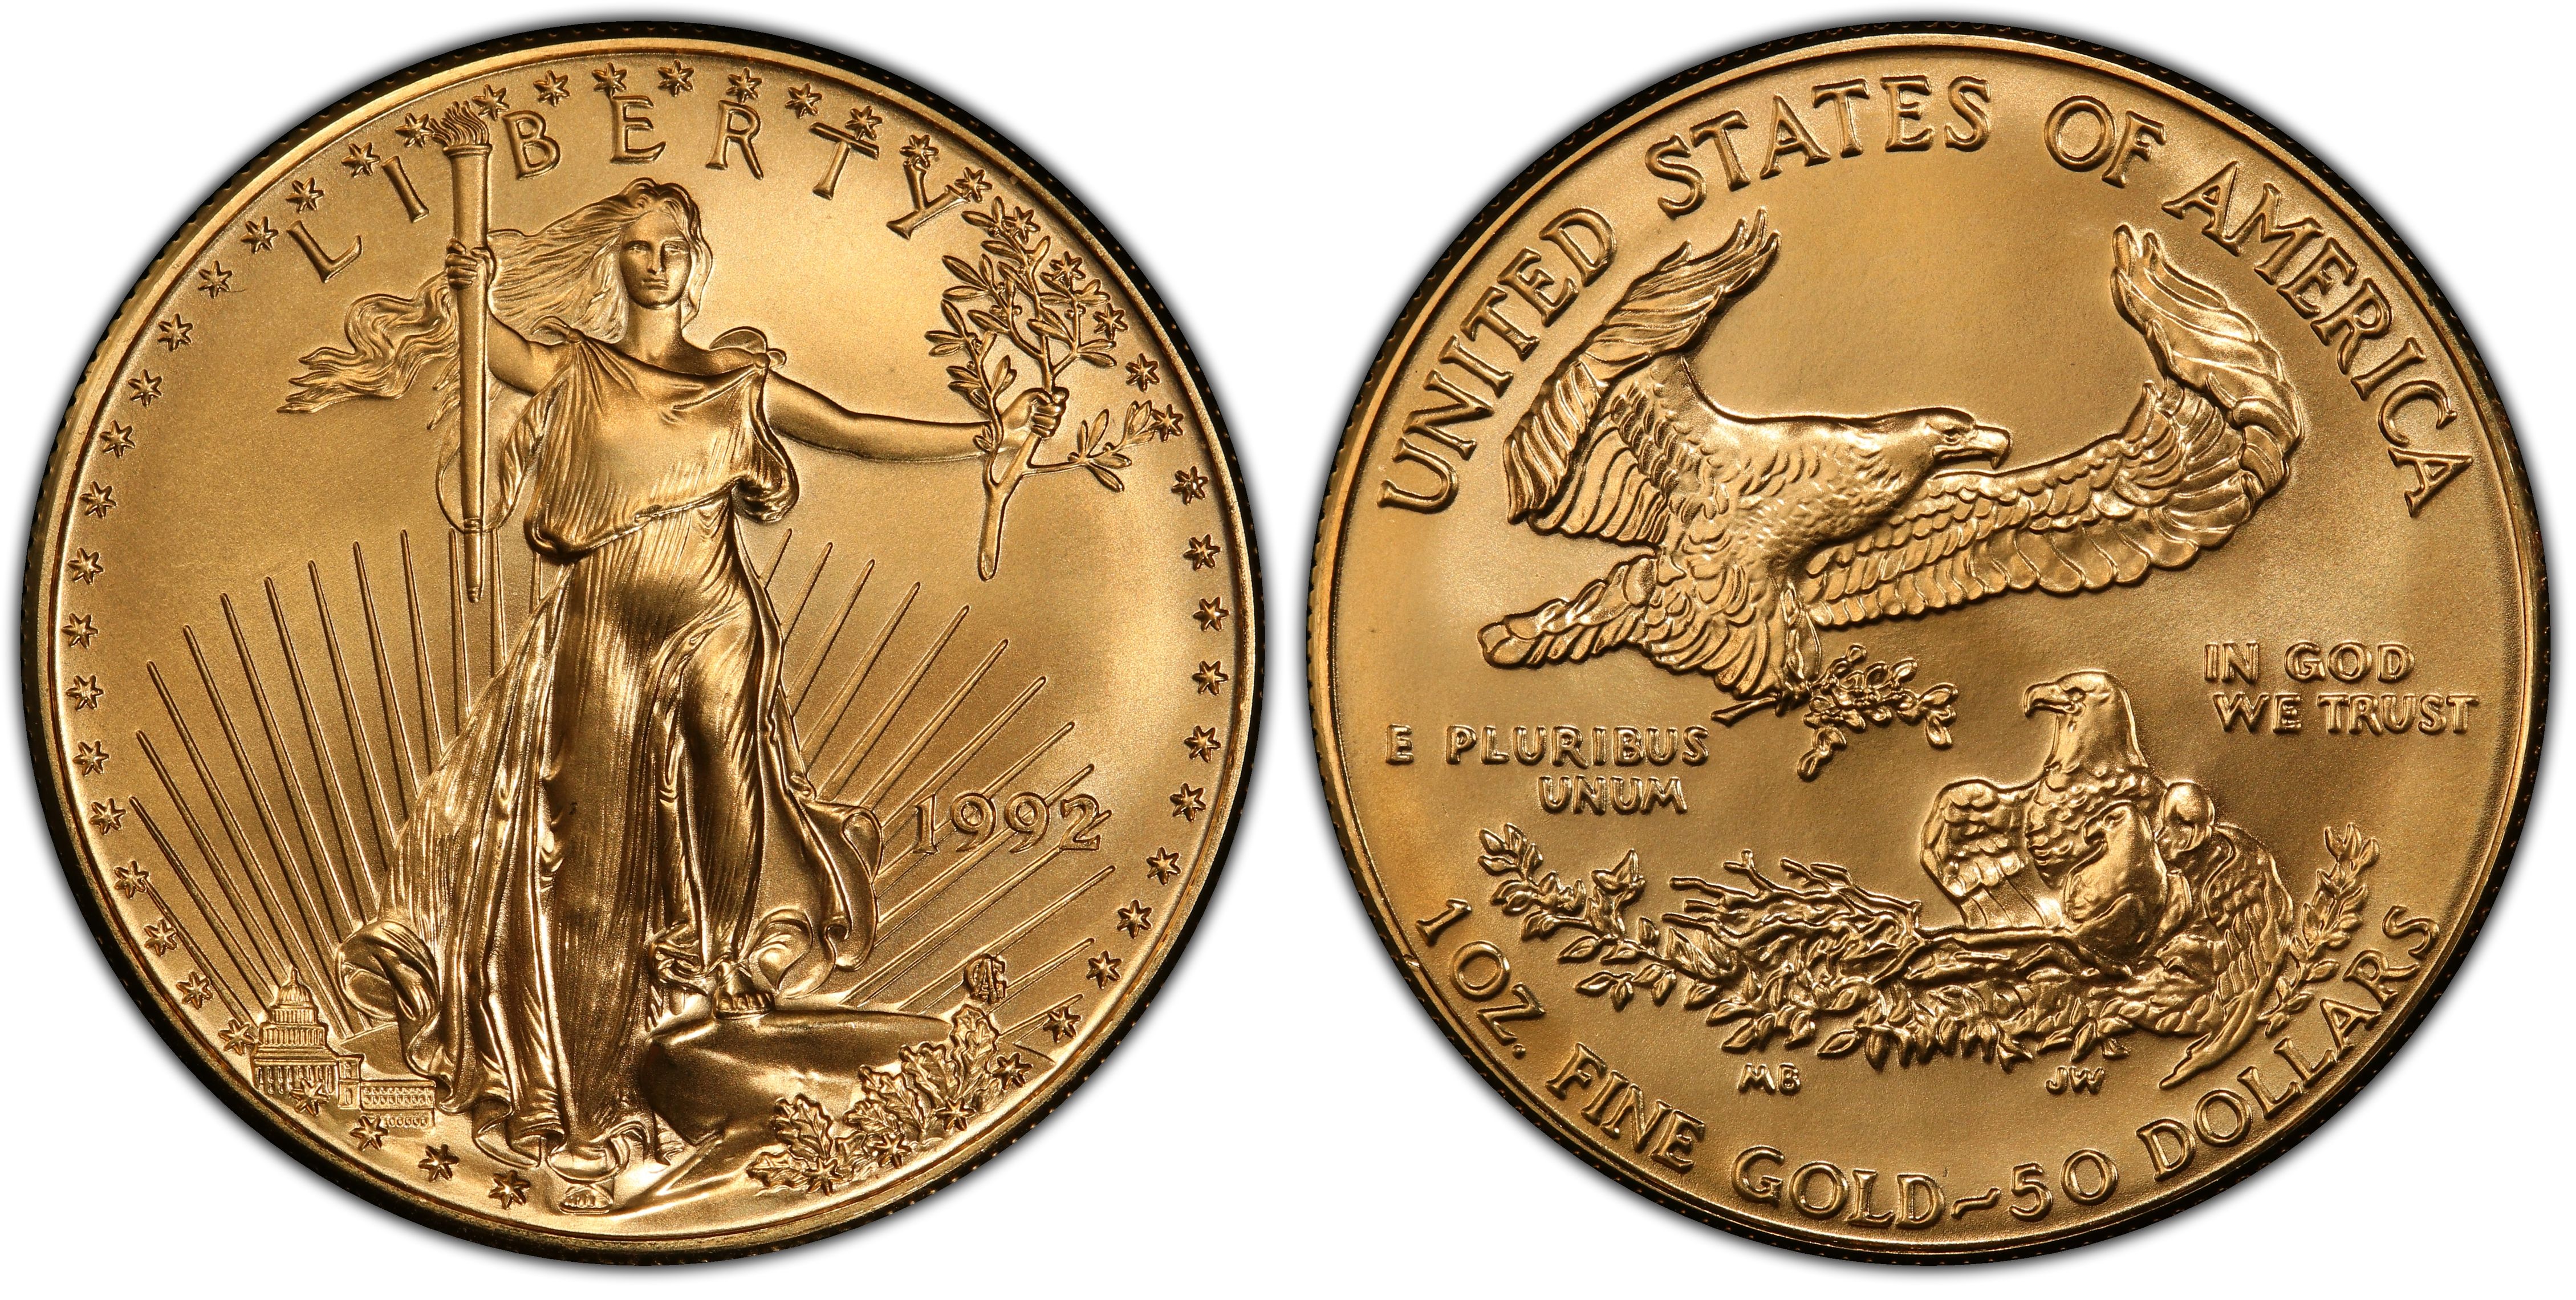 1992 $50 Gold Eagle (Regular Strike) Gold Eagles - PCGS CoinFacts